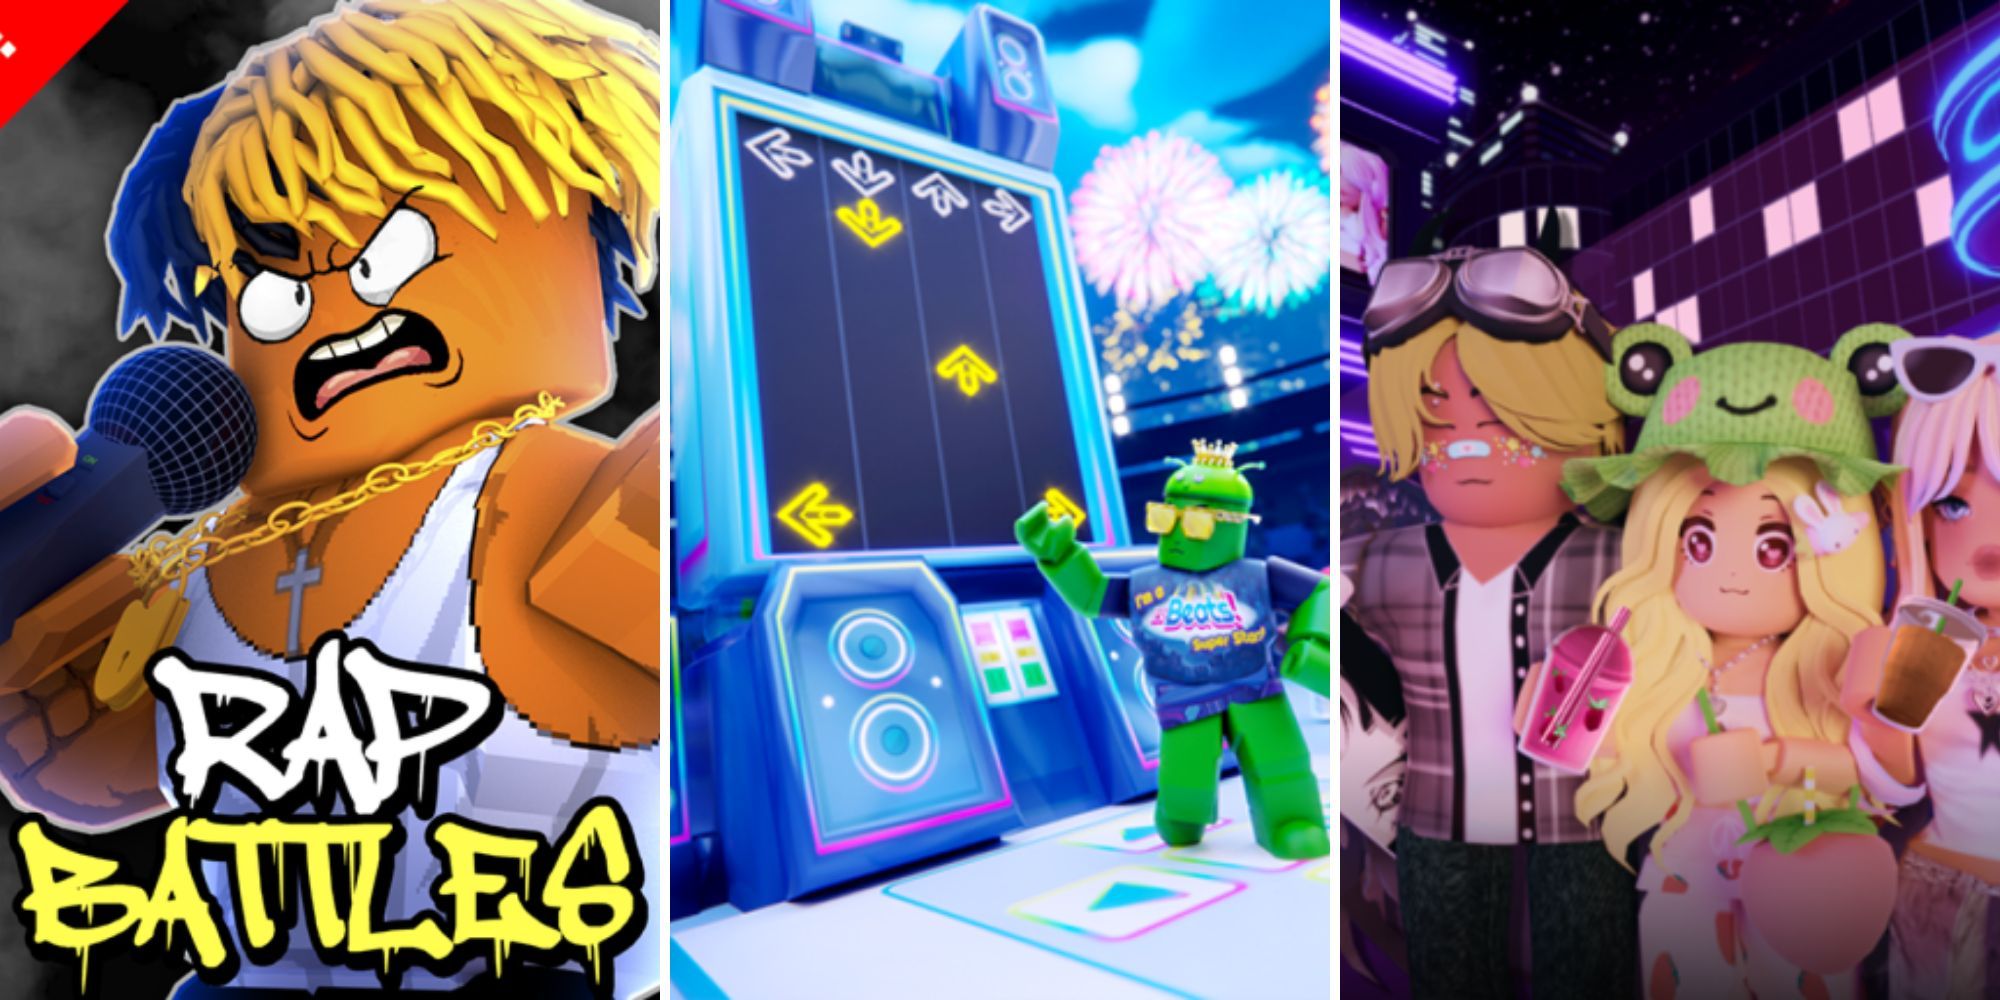 Top 10 ROBLOX Upcoming 2023 Anime Games You NEED To Play! 